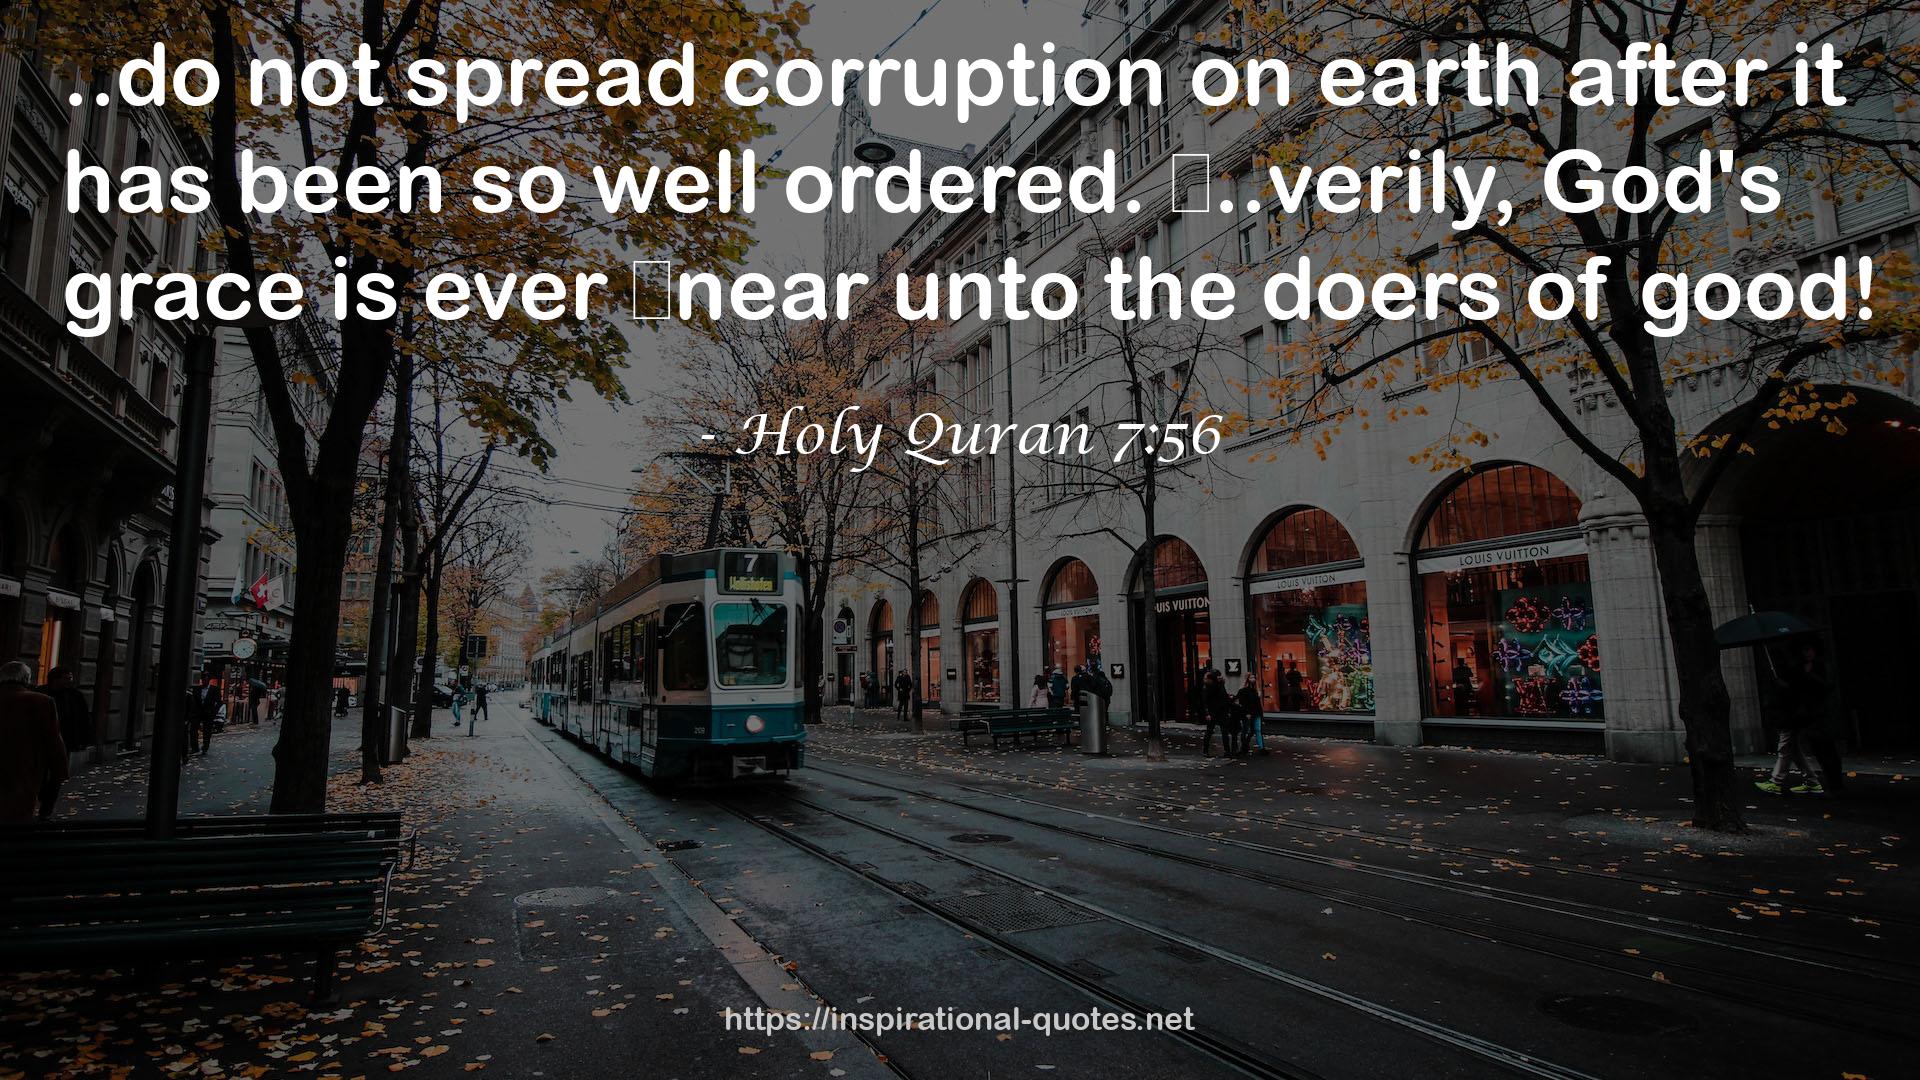 Holy Quran 7:56 QUOTES